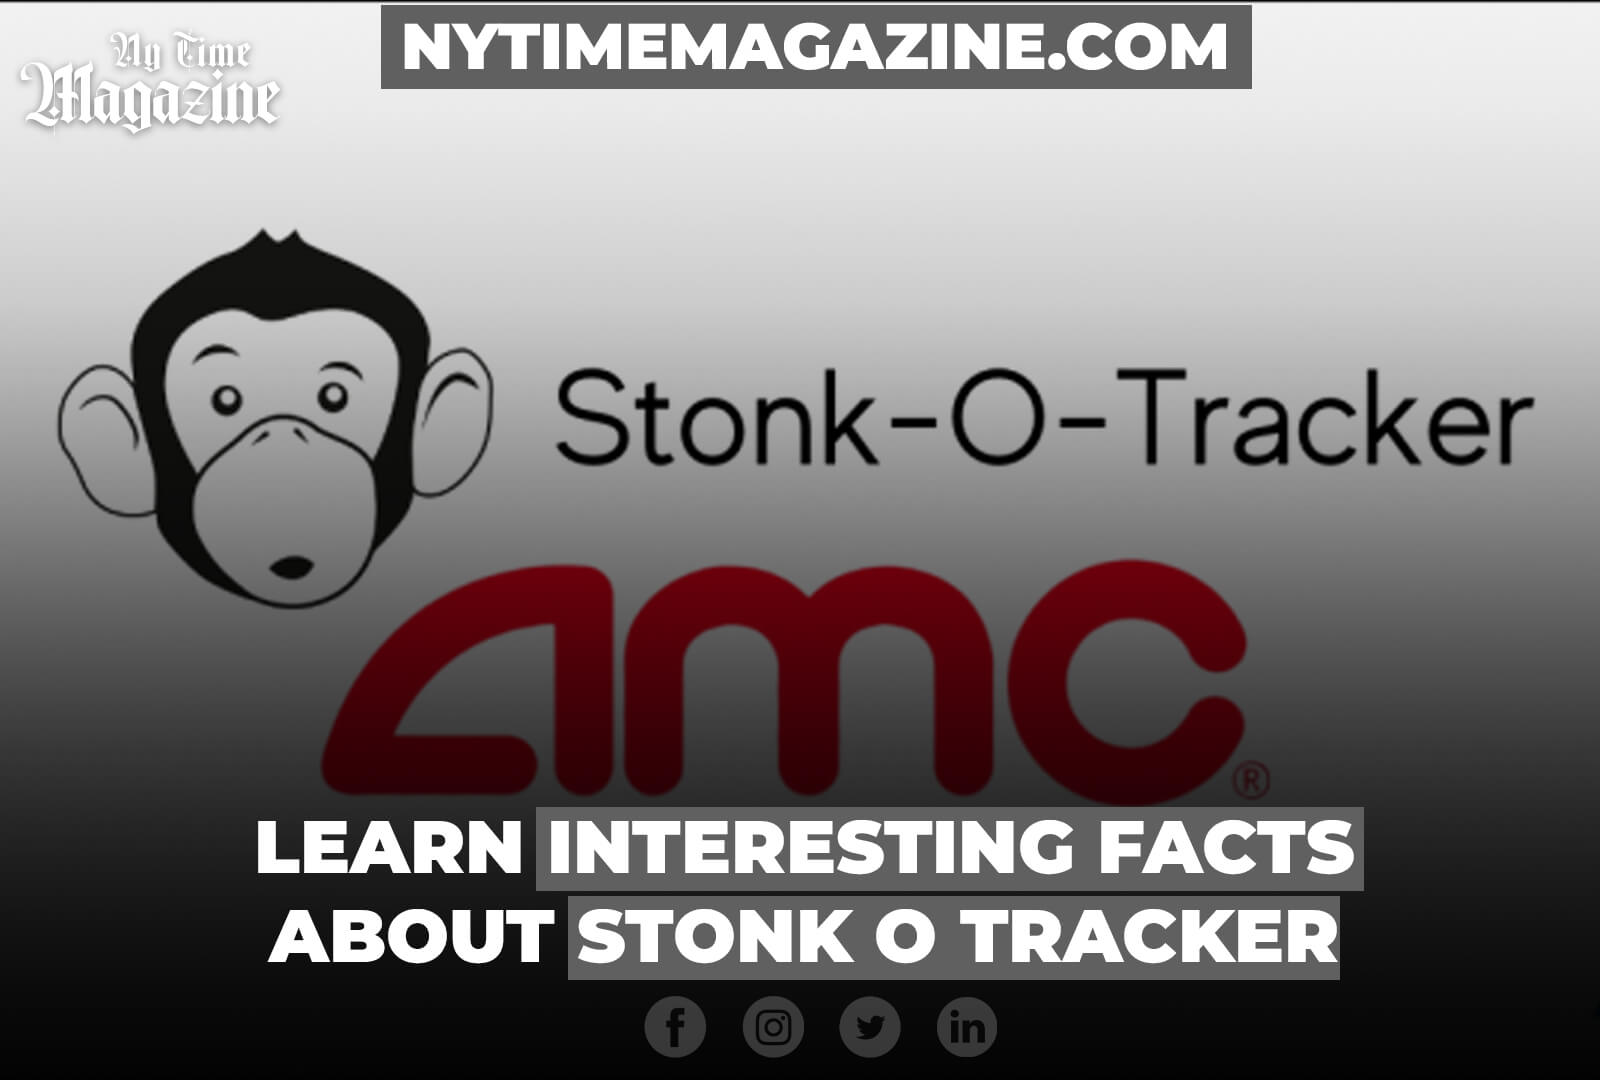 LEARN INTERESTING FACTS ABOUT STONK O TRACKER